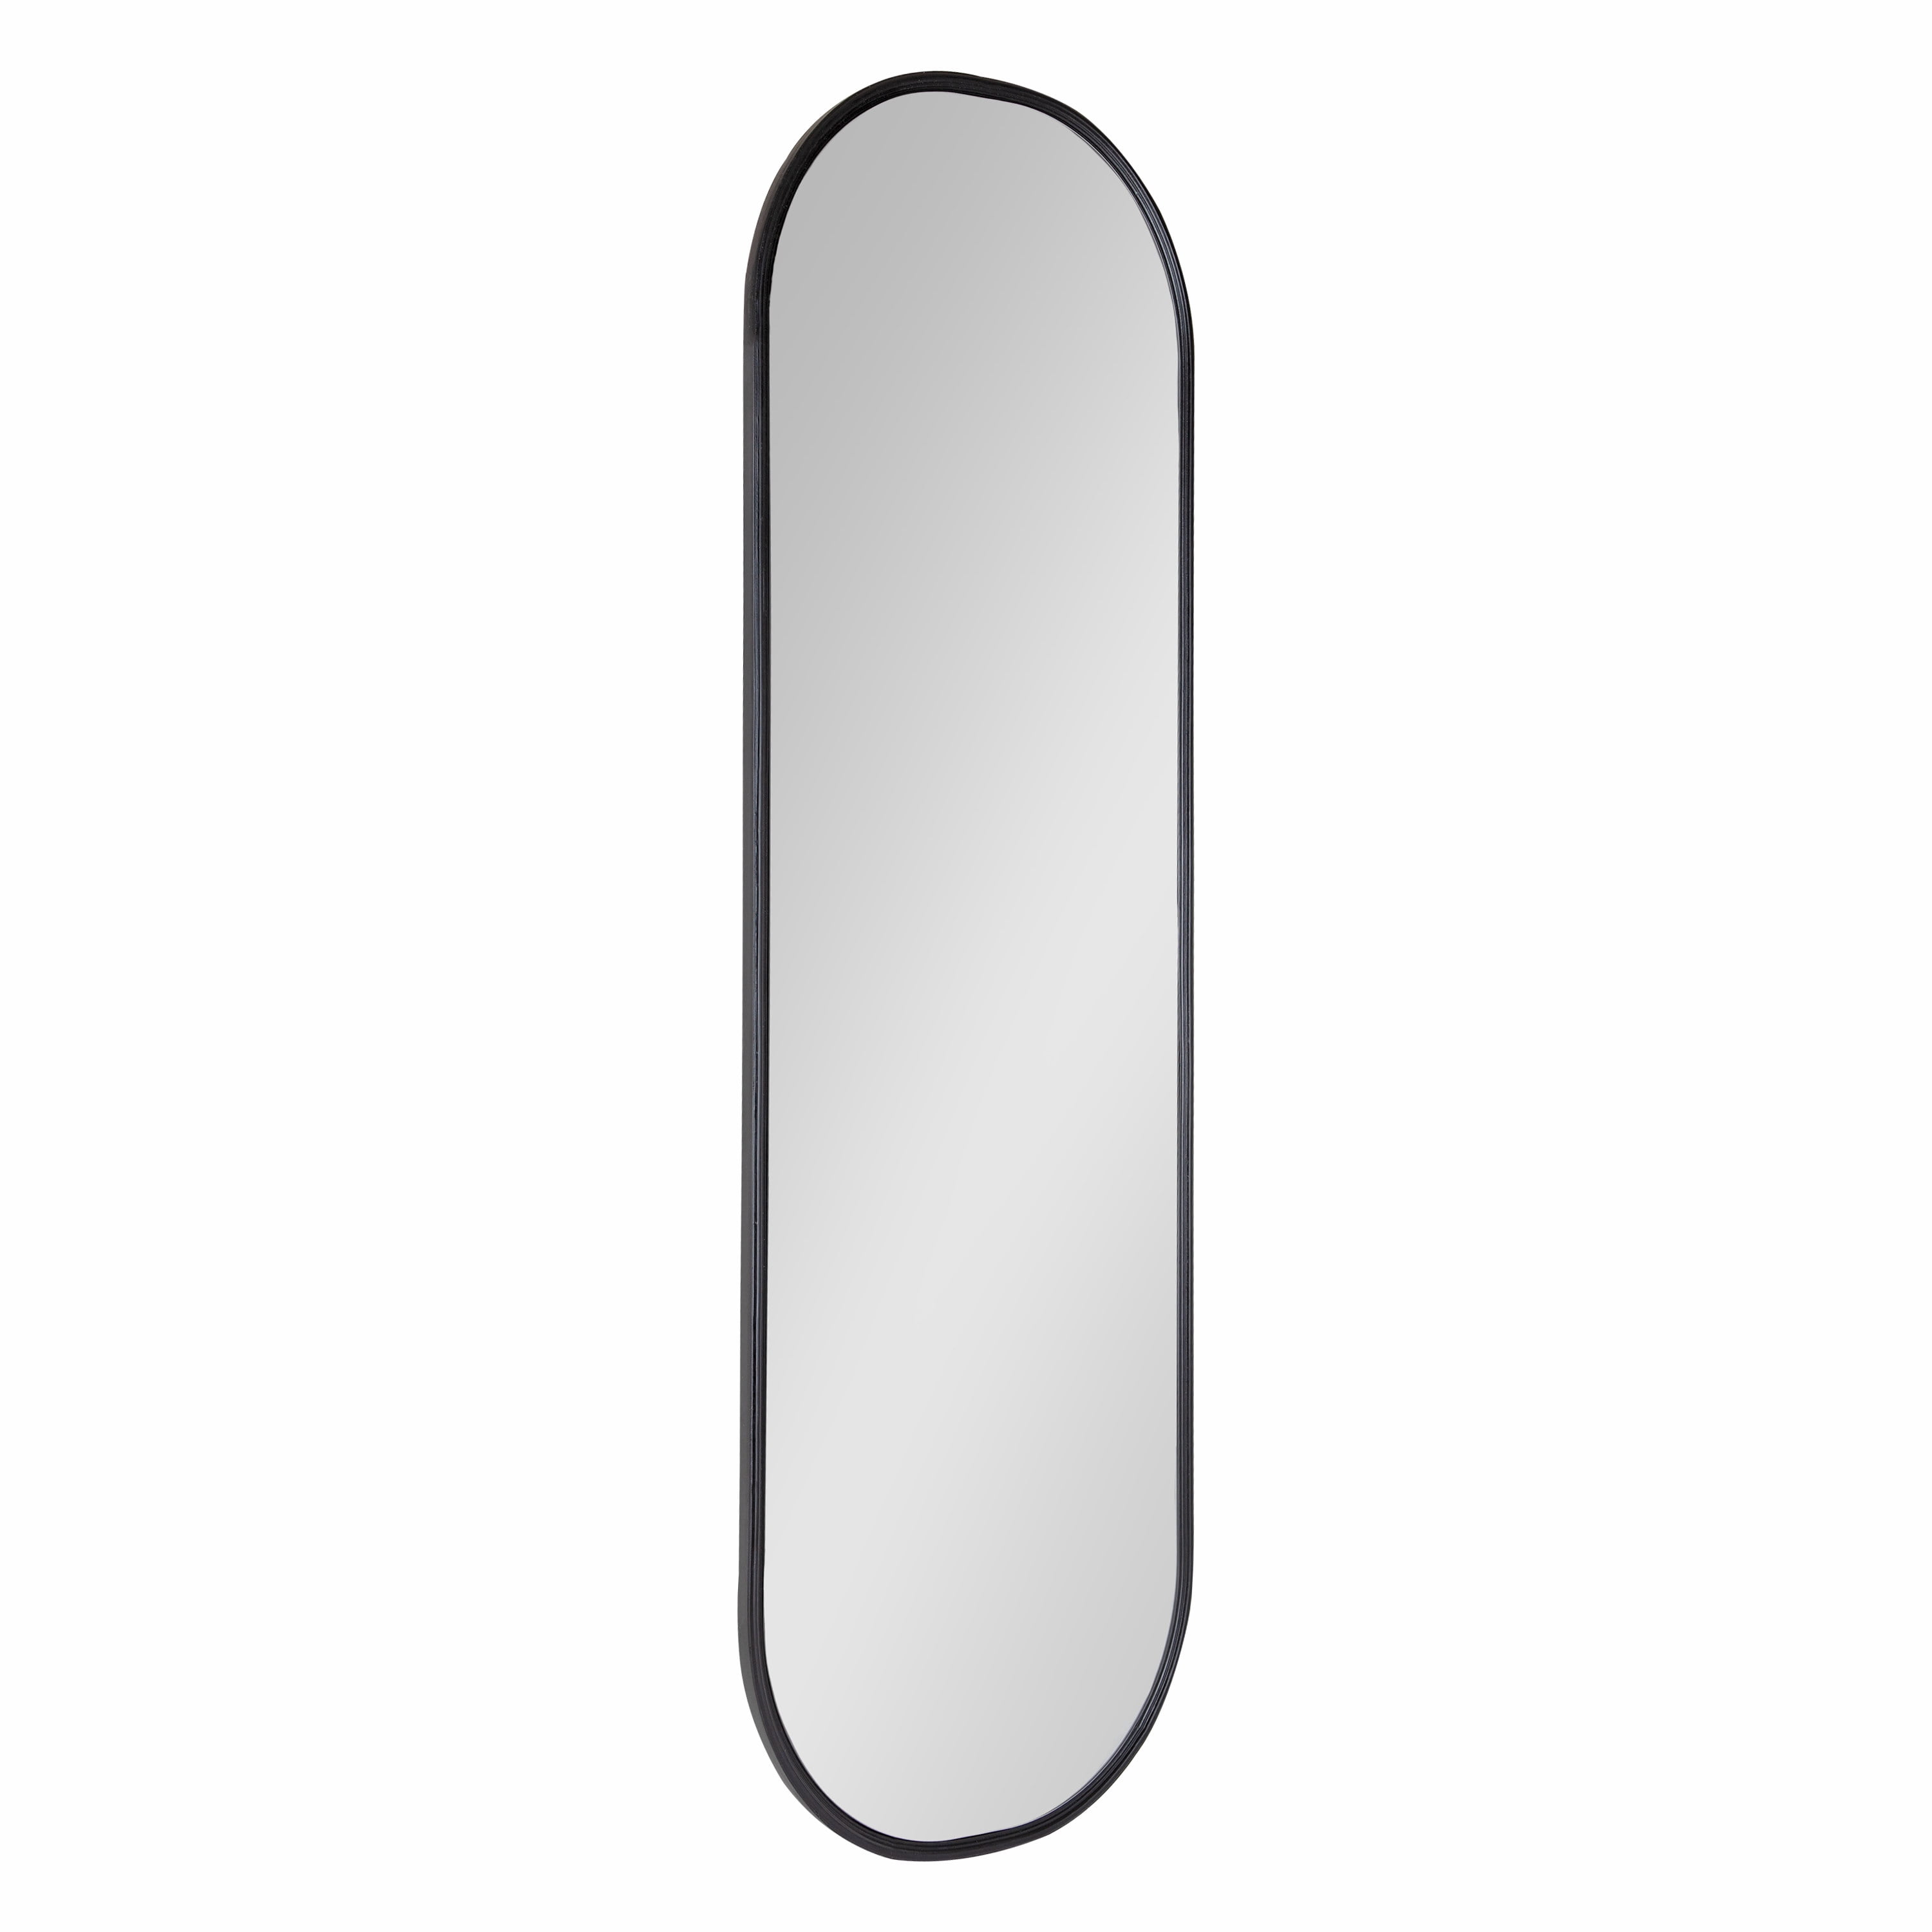 Kate and Laurel Caskill Modern Oval Mirror, 16